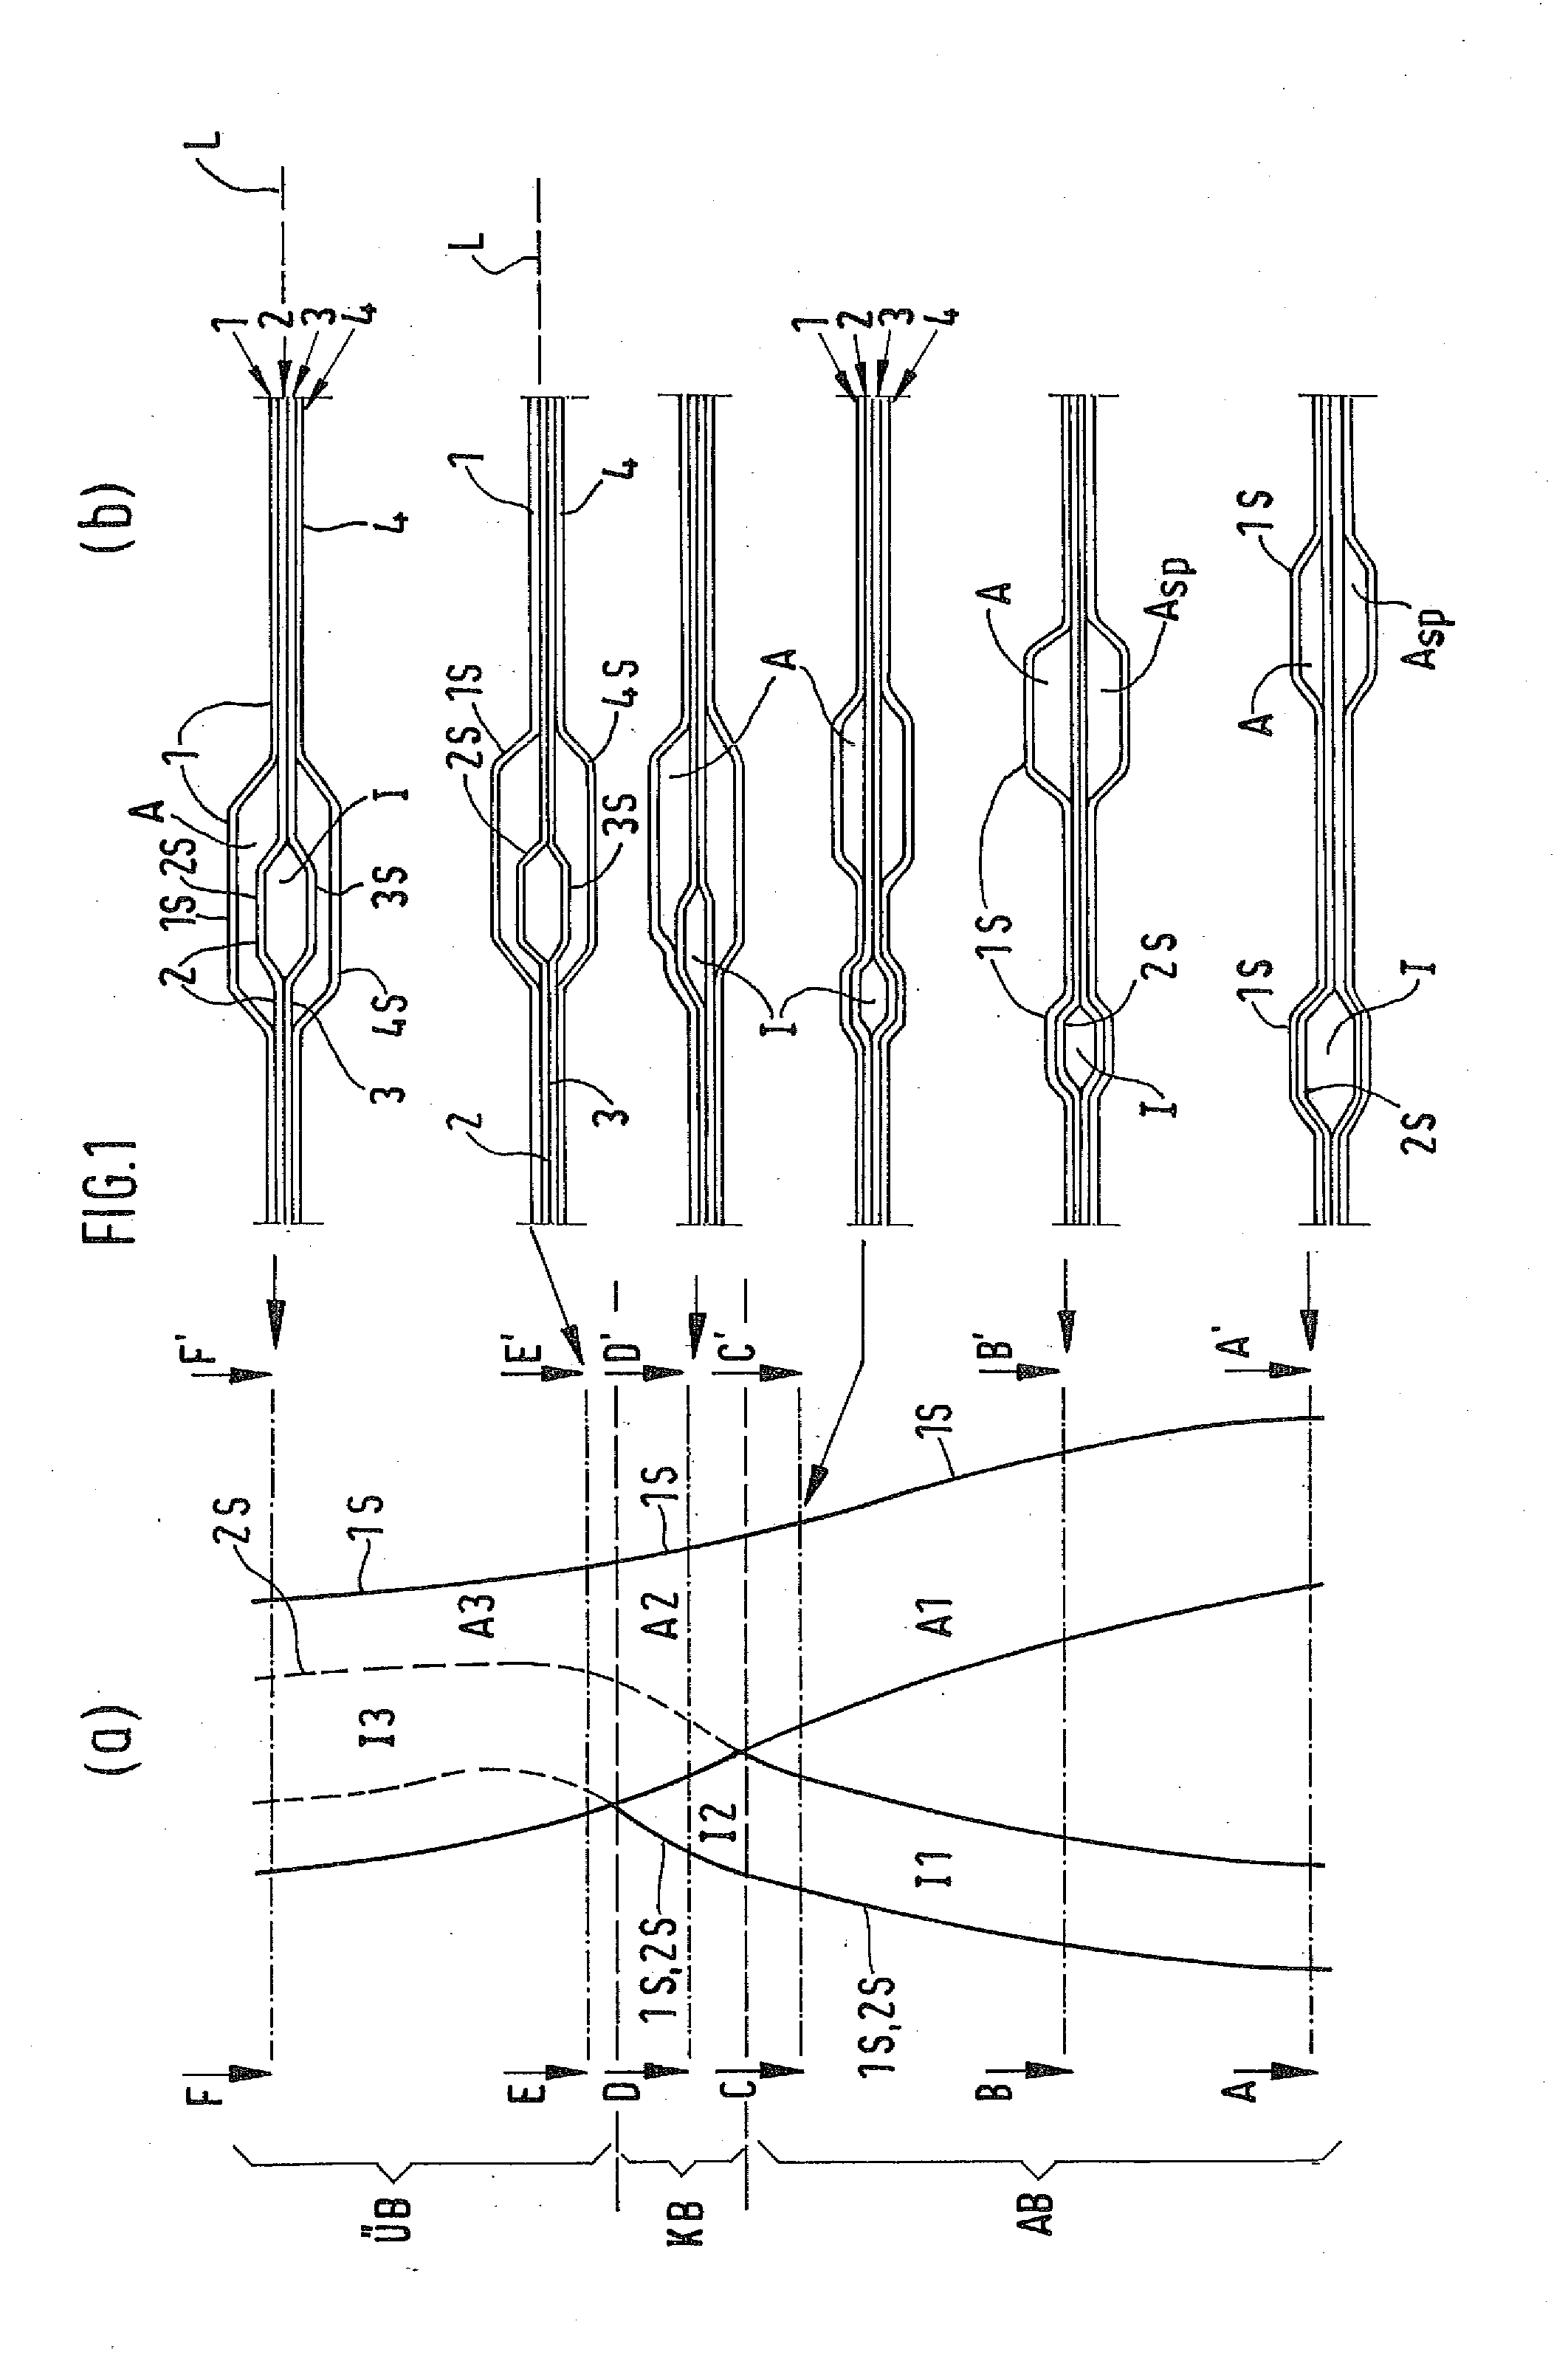 Fluid distribution element for a fluid-conducting device, in particular for multichannel-like fluid-conducting appliances which are nested in each other